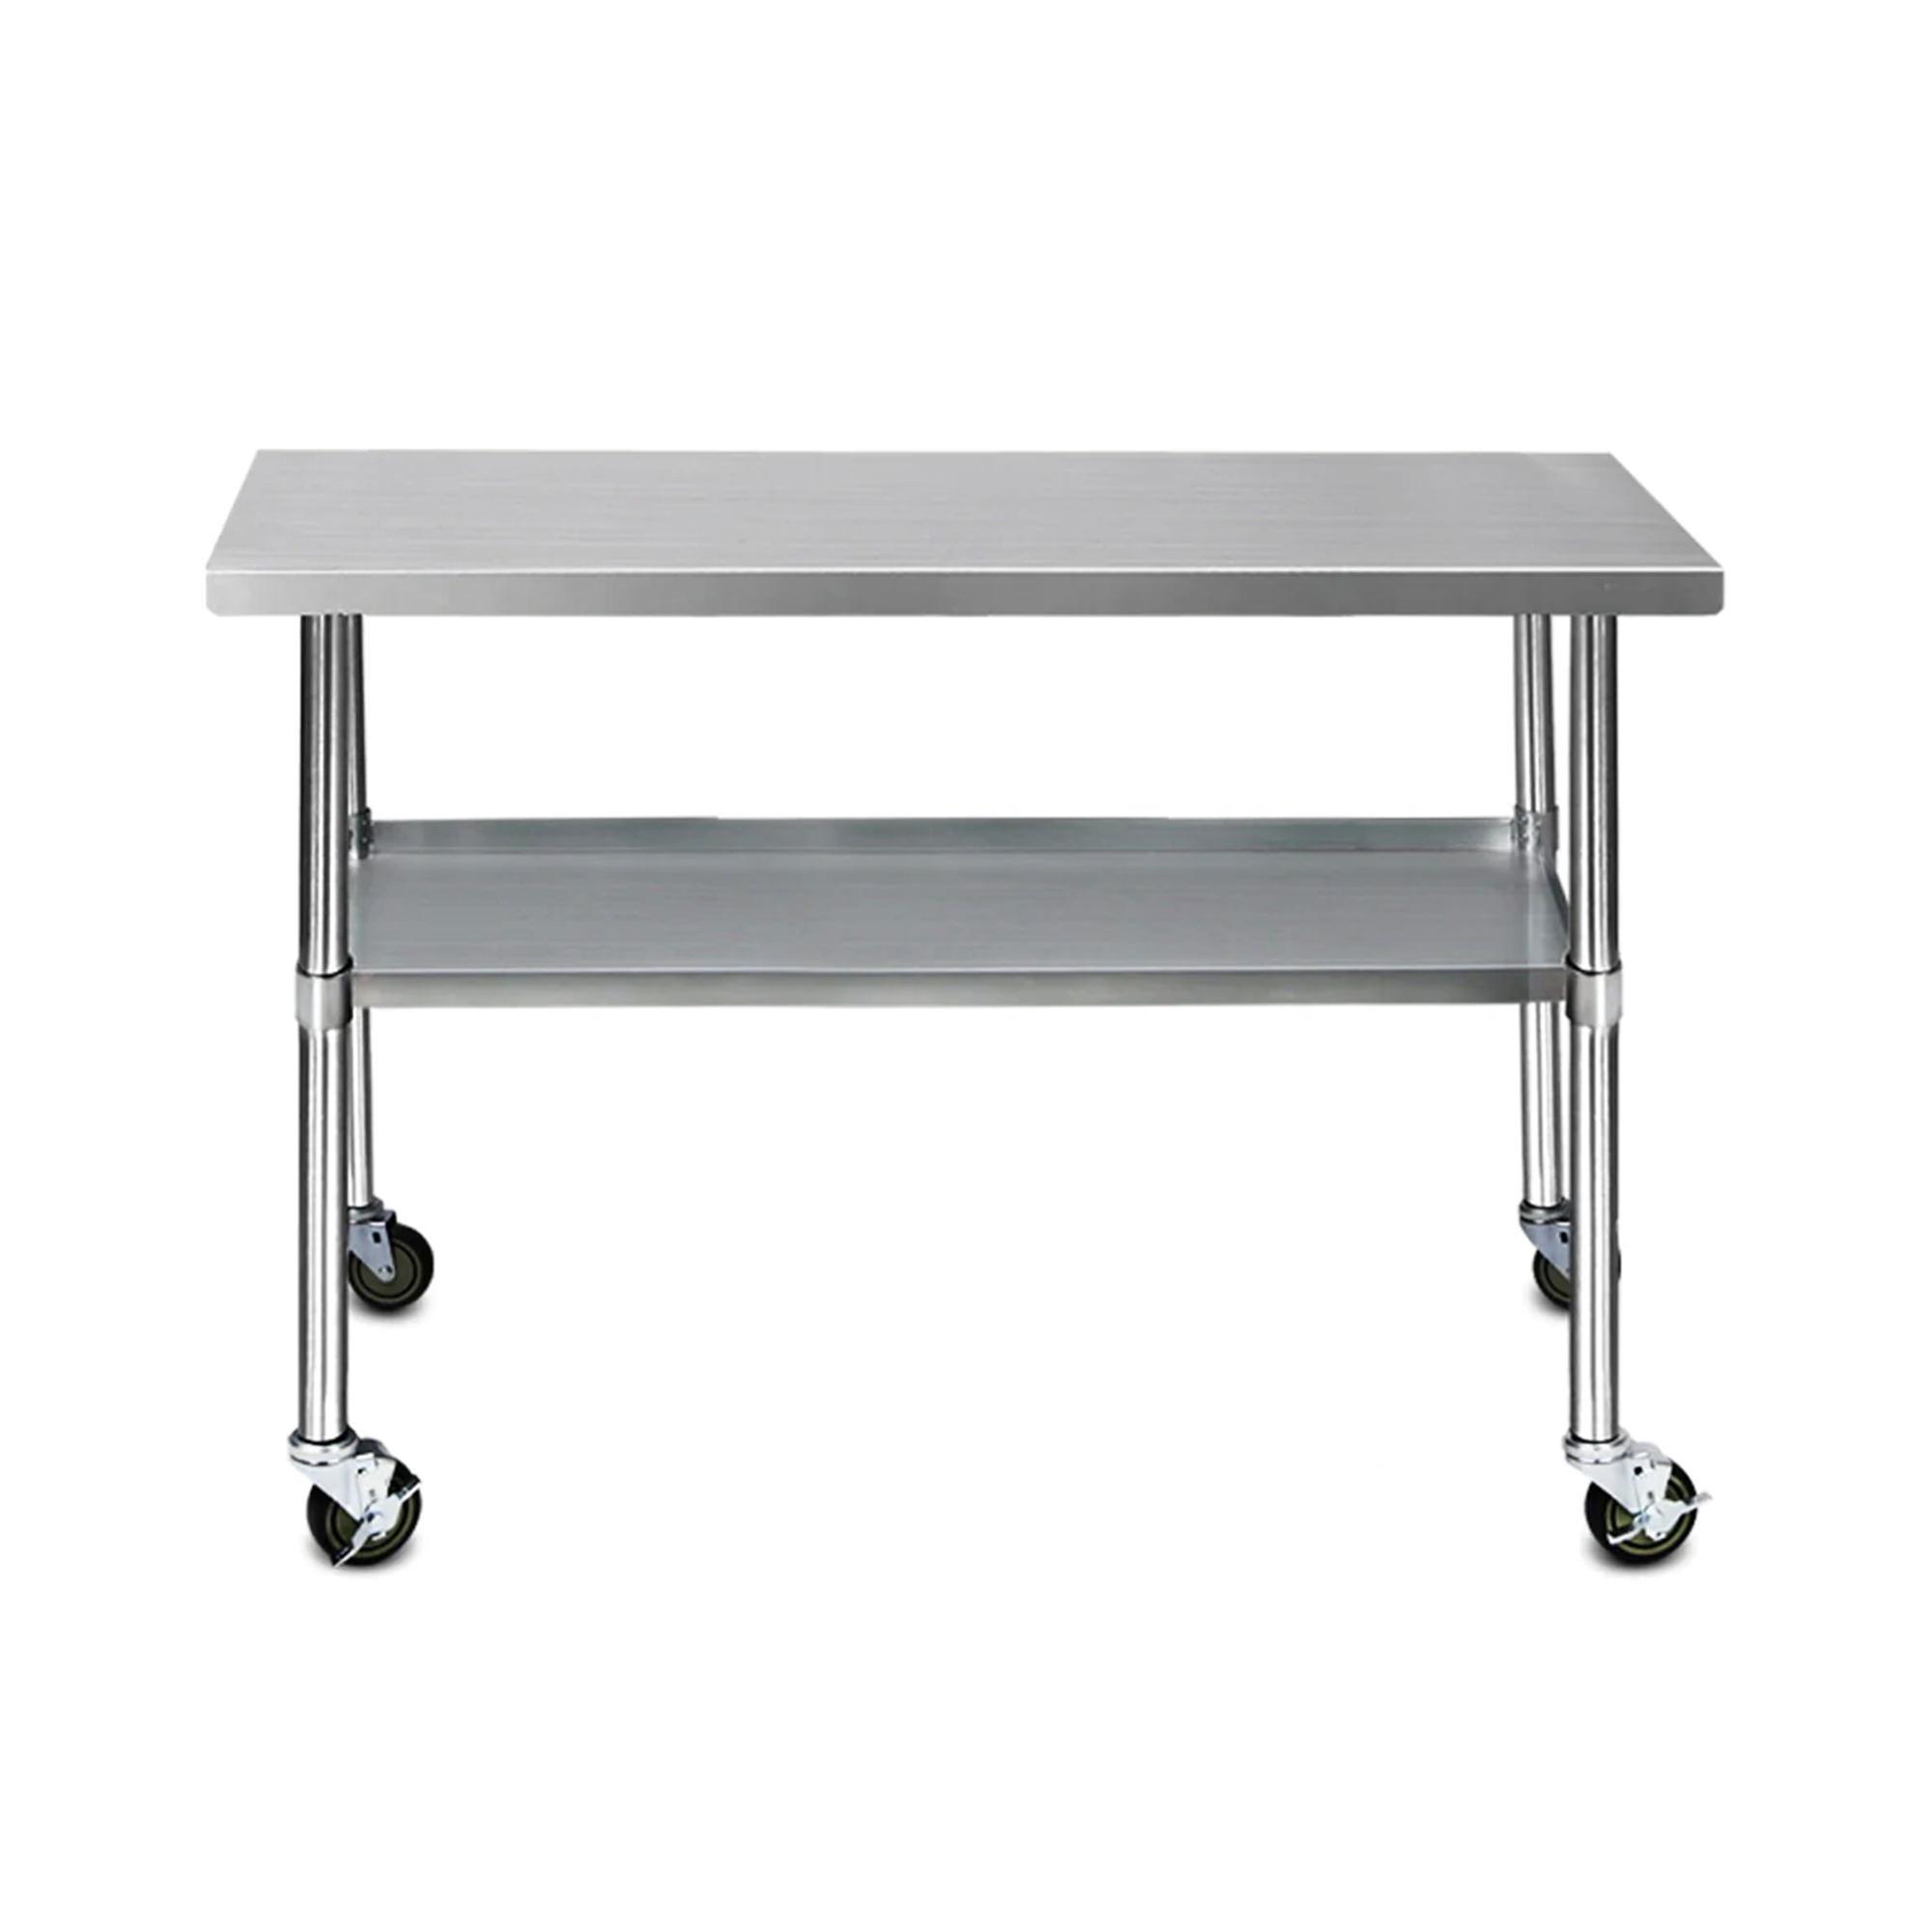 Cefito 430 Stainless Steel Kitchen Bench with Wheels 121.9x61cm Image 2